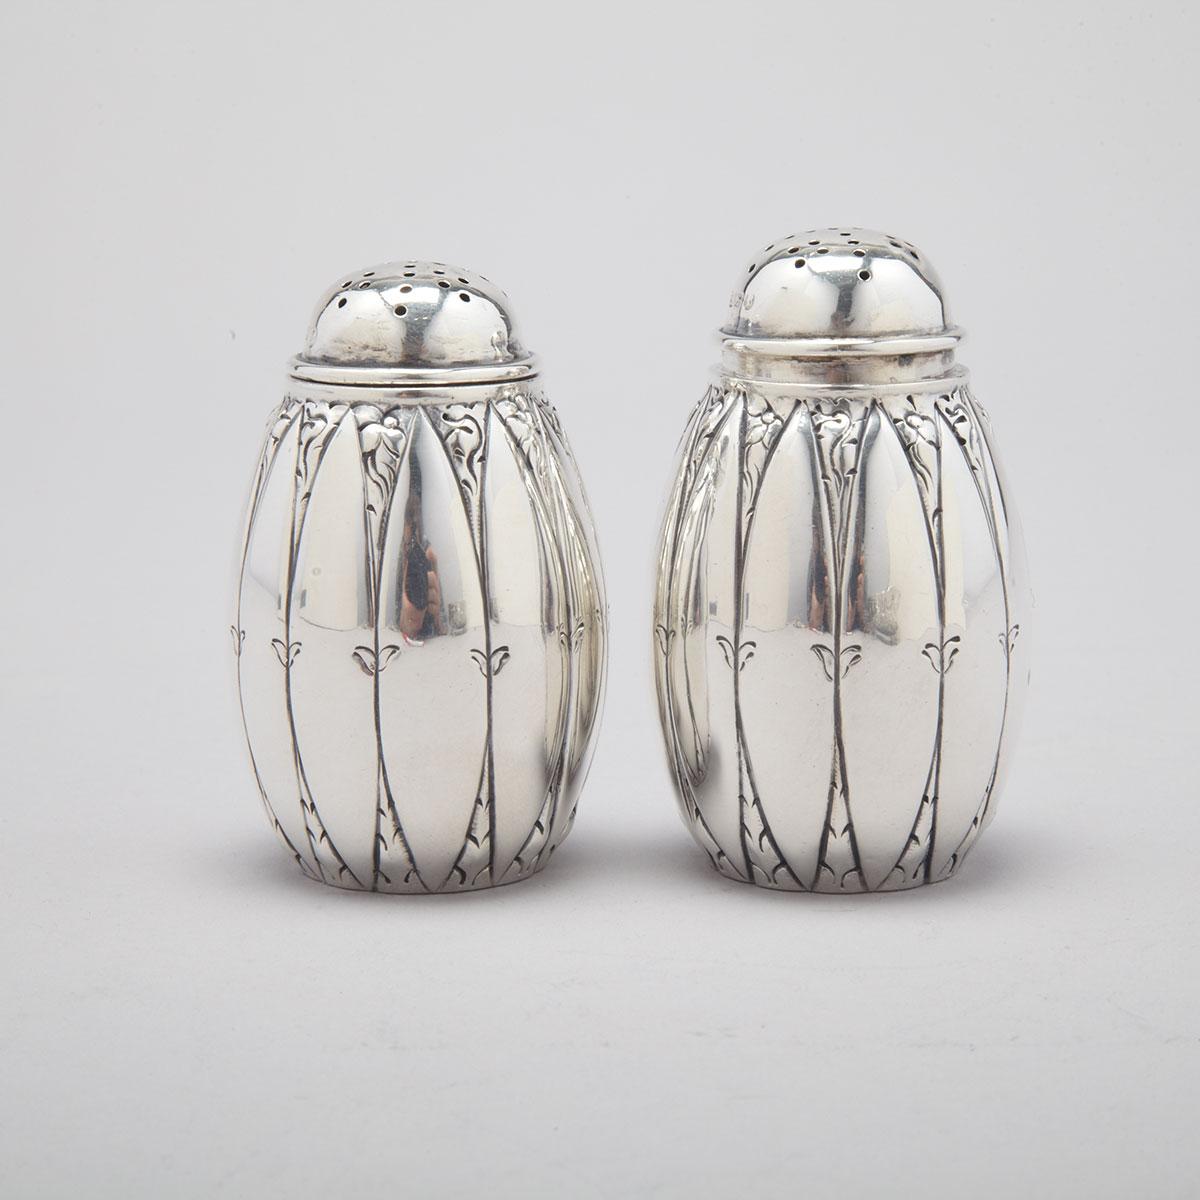 Pair of Victorian Silver Pepper Casters, Harrison Bros. & Howson, Sheffield, 1885